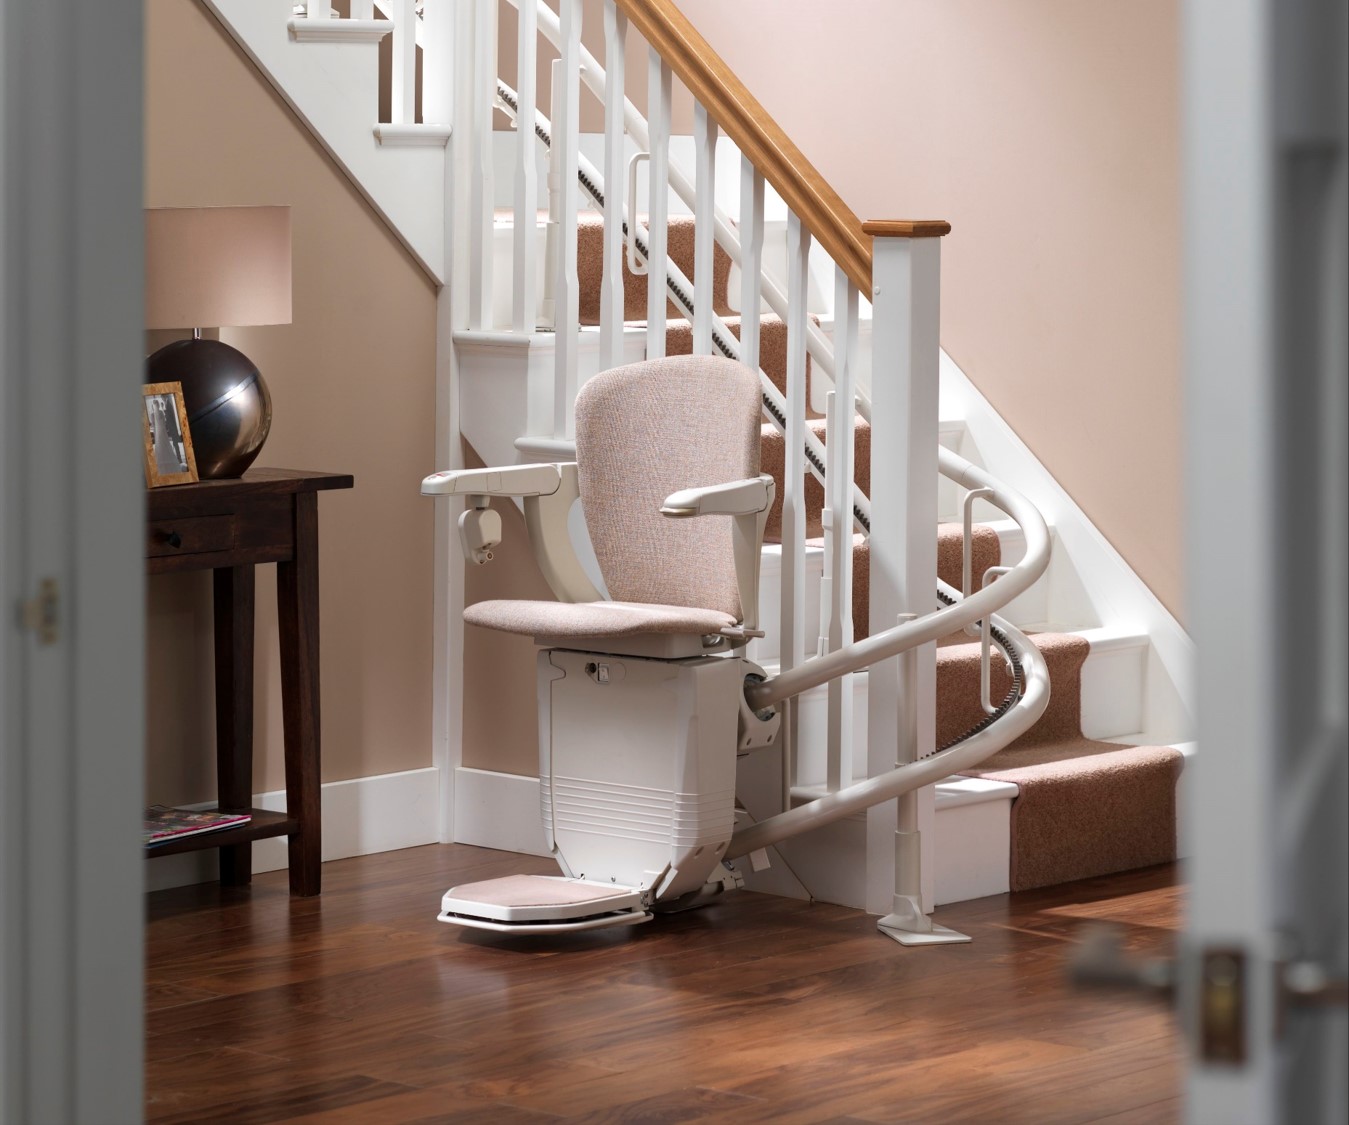 Stannah curved stairlift on the first floor